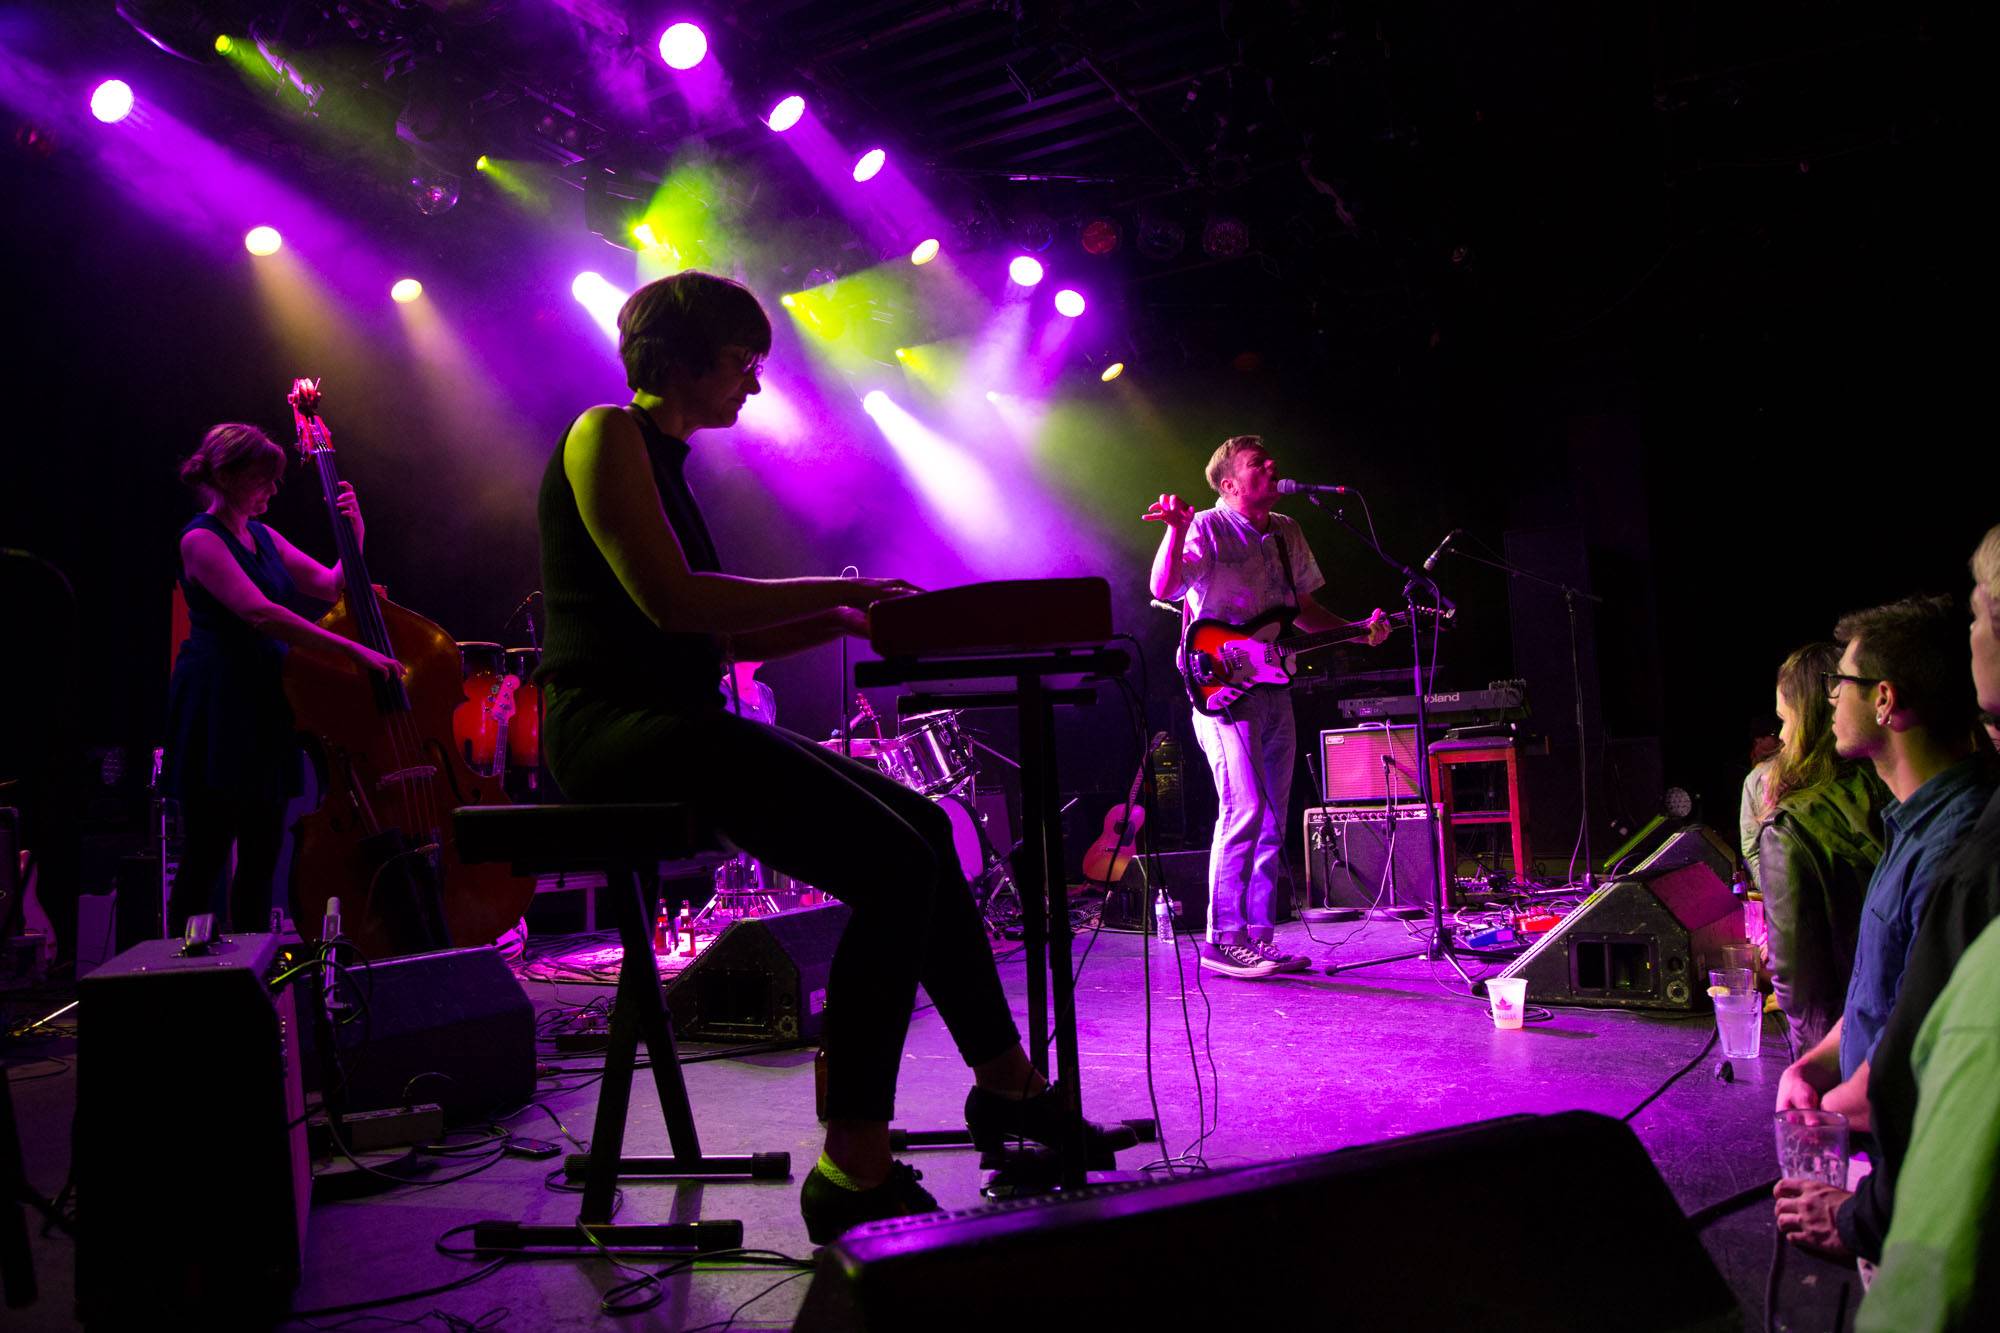 Frog Eyes at the Commodore Ballroom, Vancouver, Oct 17 2015. Kirk Chantraine photo.